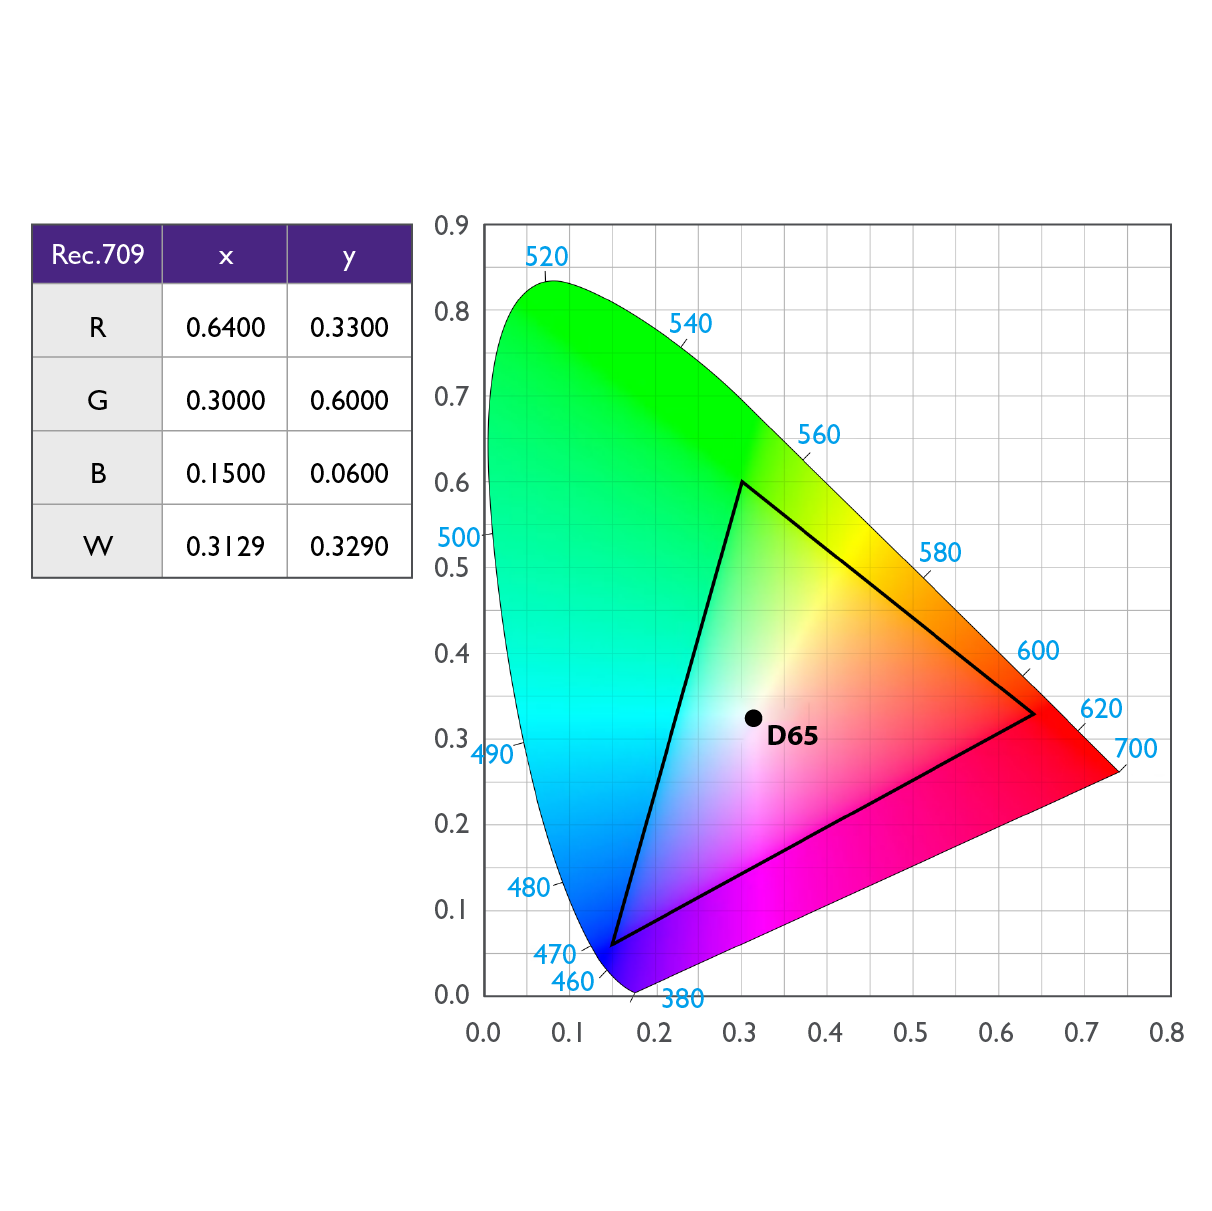 Rec. 709 is a standard set by the International Telecommunication Union (ITU) for HDTV that includes the Rec. 709 color space which is identical to the sRGB color space.